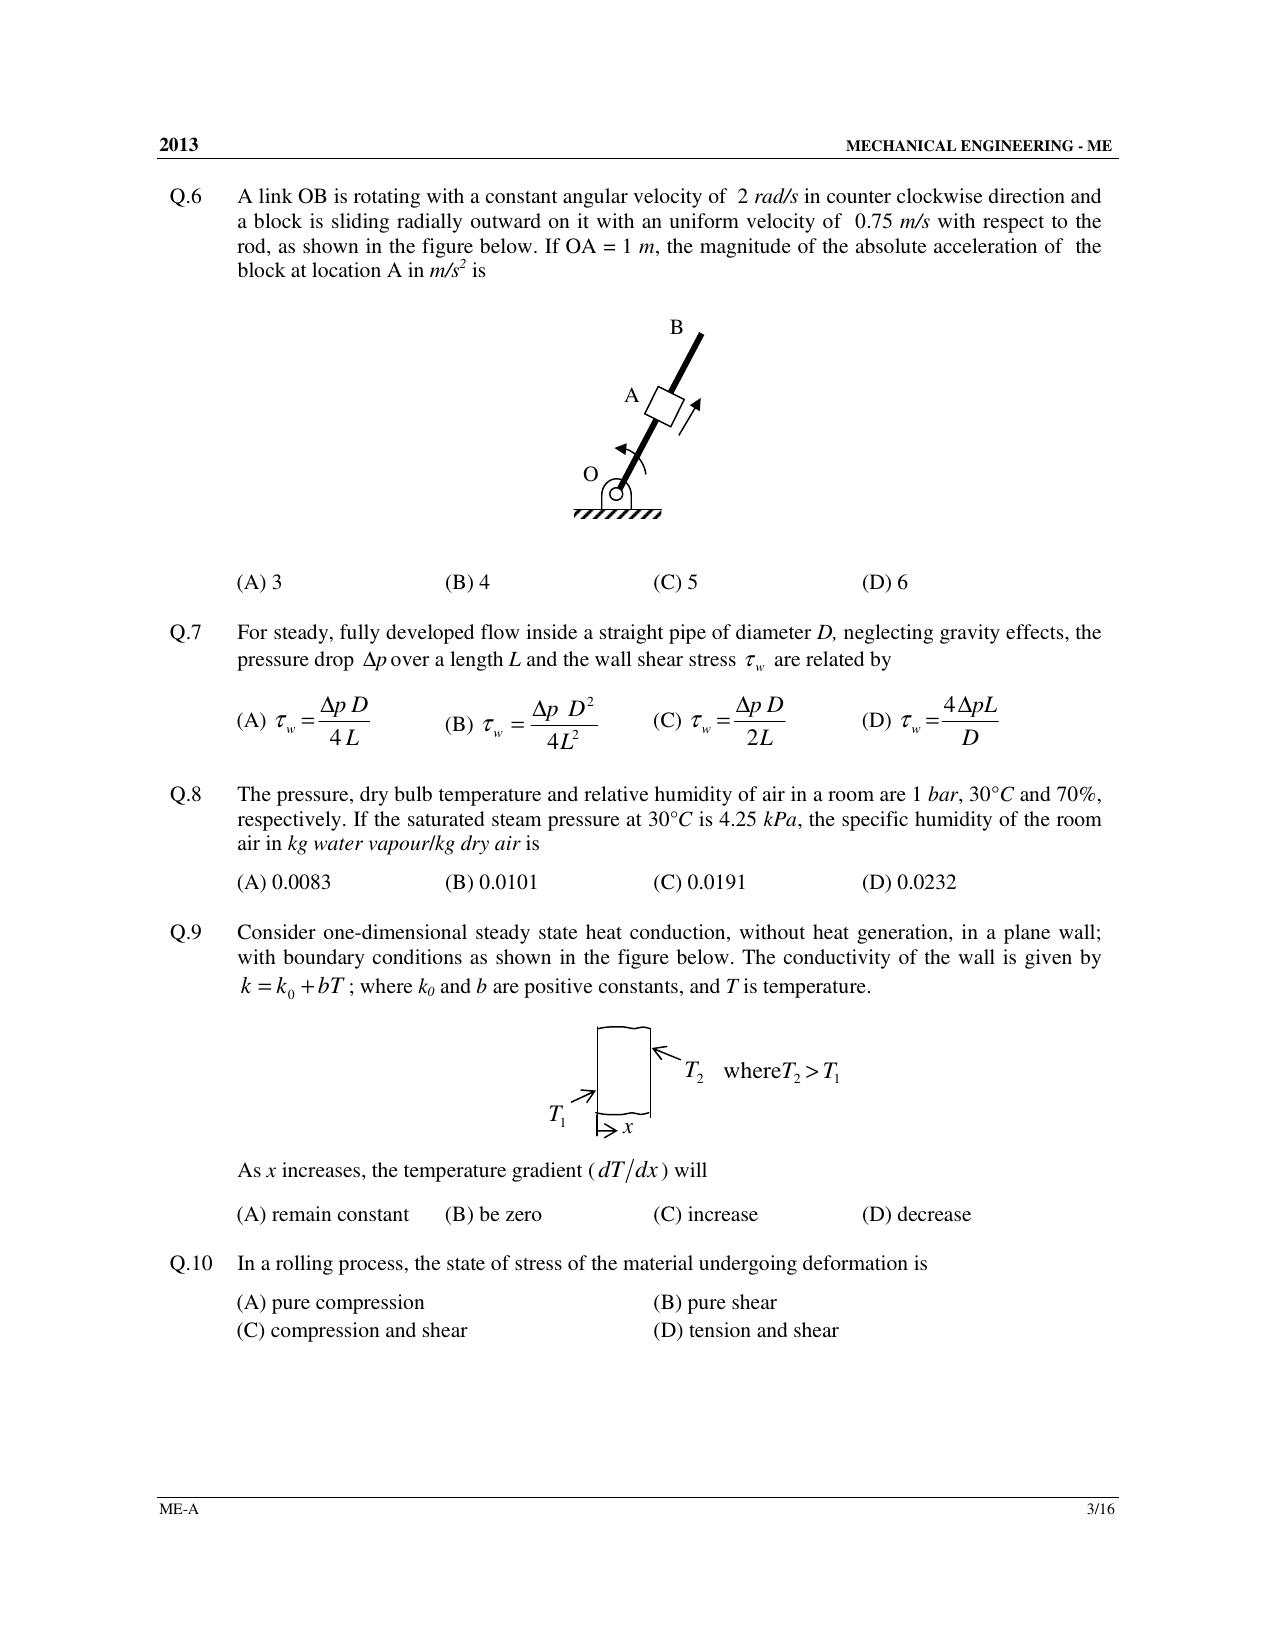 GATE 2013 Mechanical Engineering (ME) Question Paper with Answer Key - Page 4